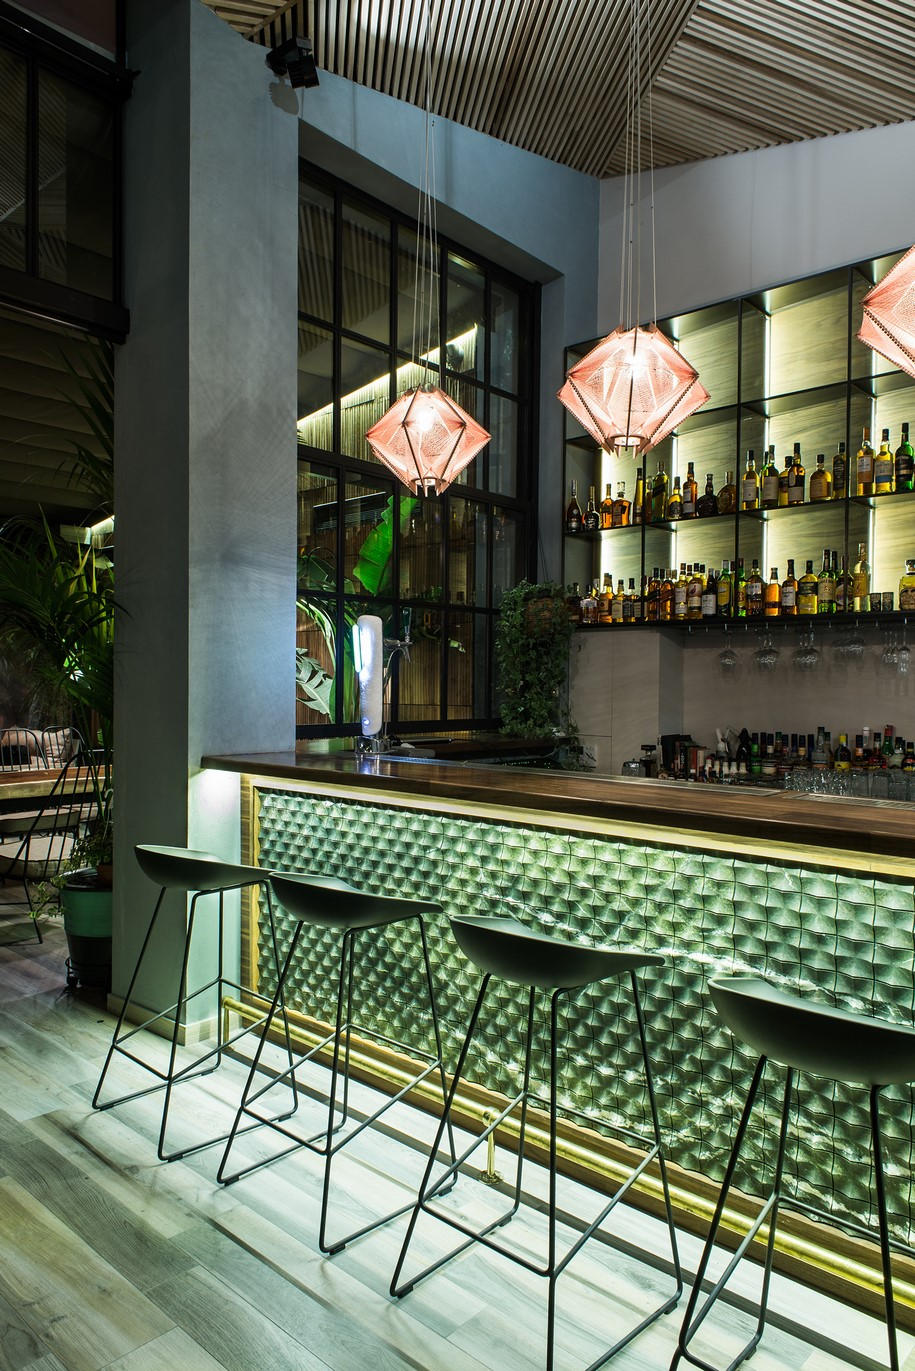 Archisearch Studionoh's New Cocktail Bar in Athens Embraces Greenery